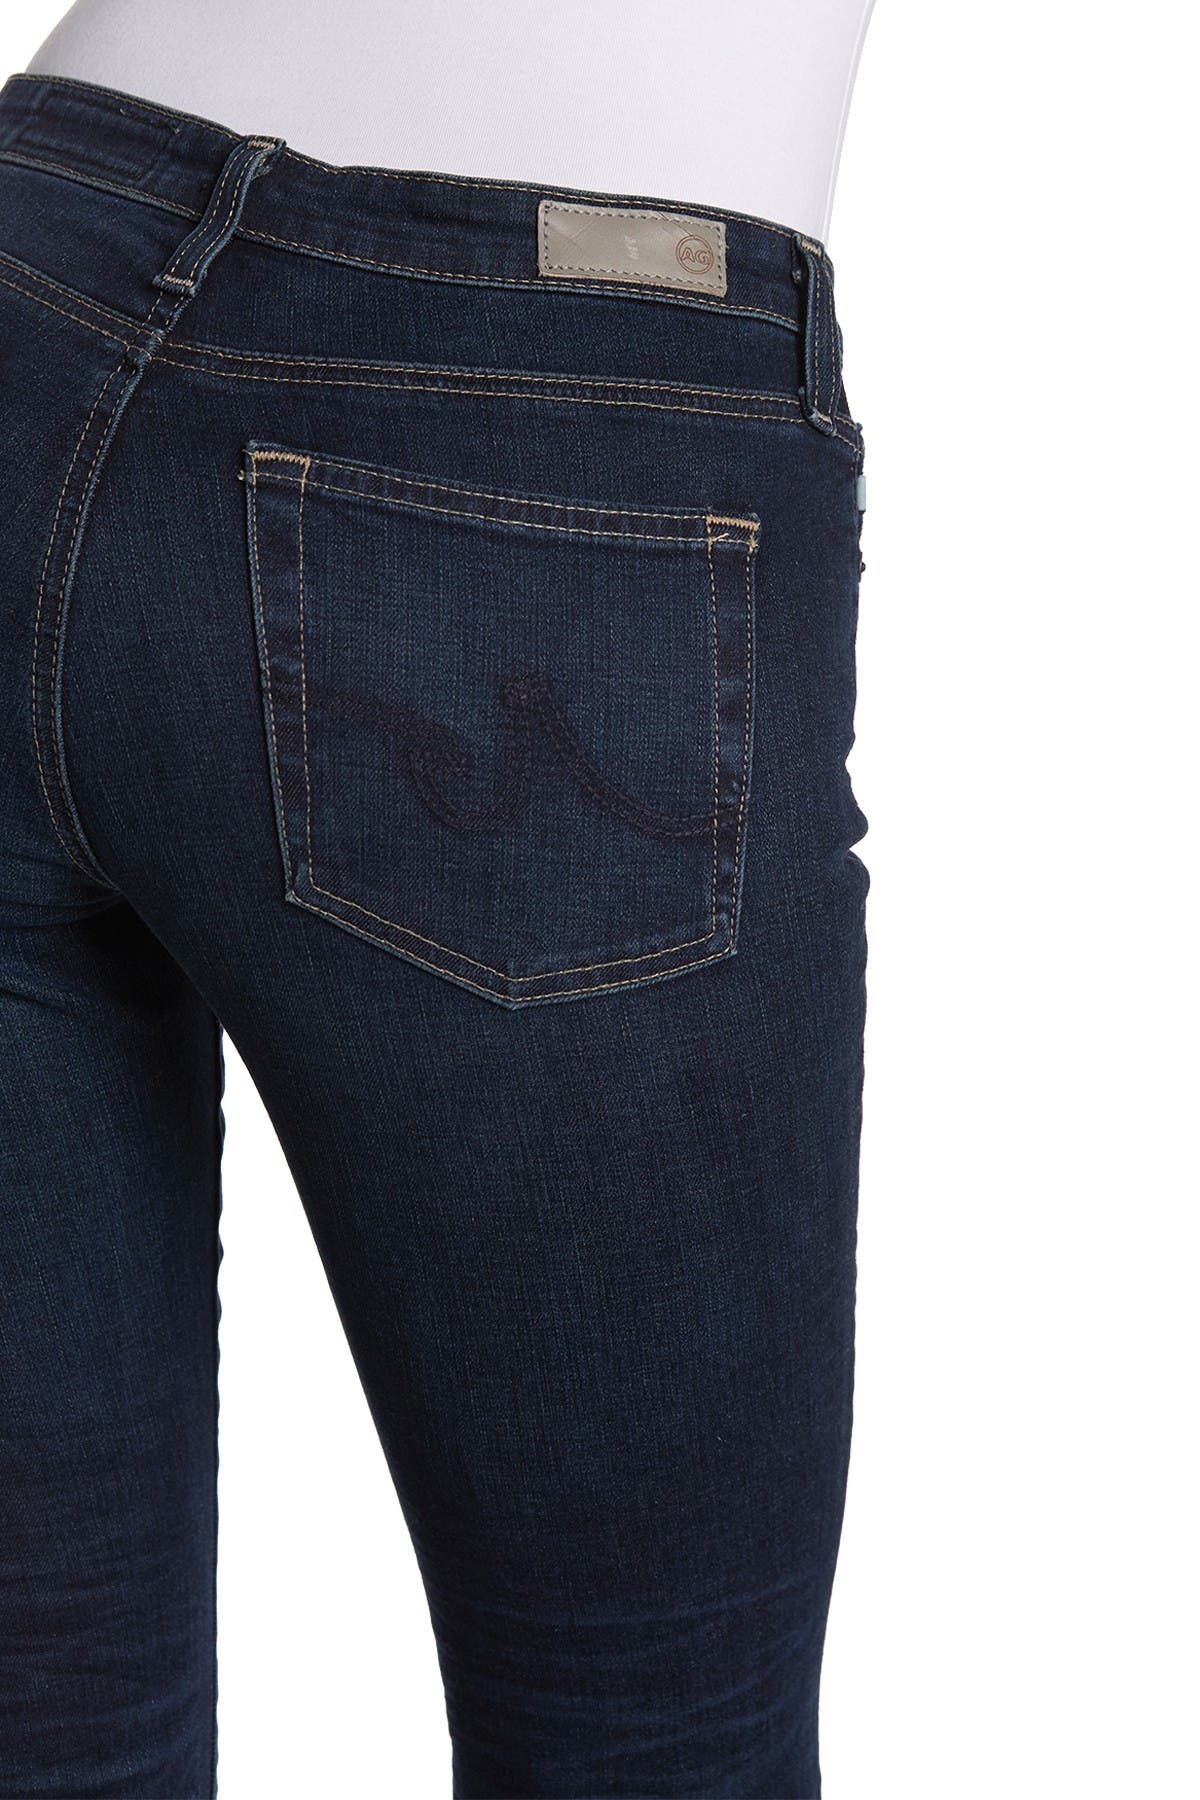 ag the new angel bootcut jeans